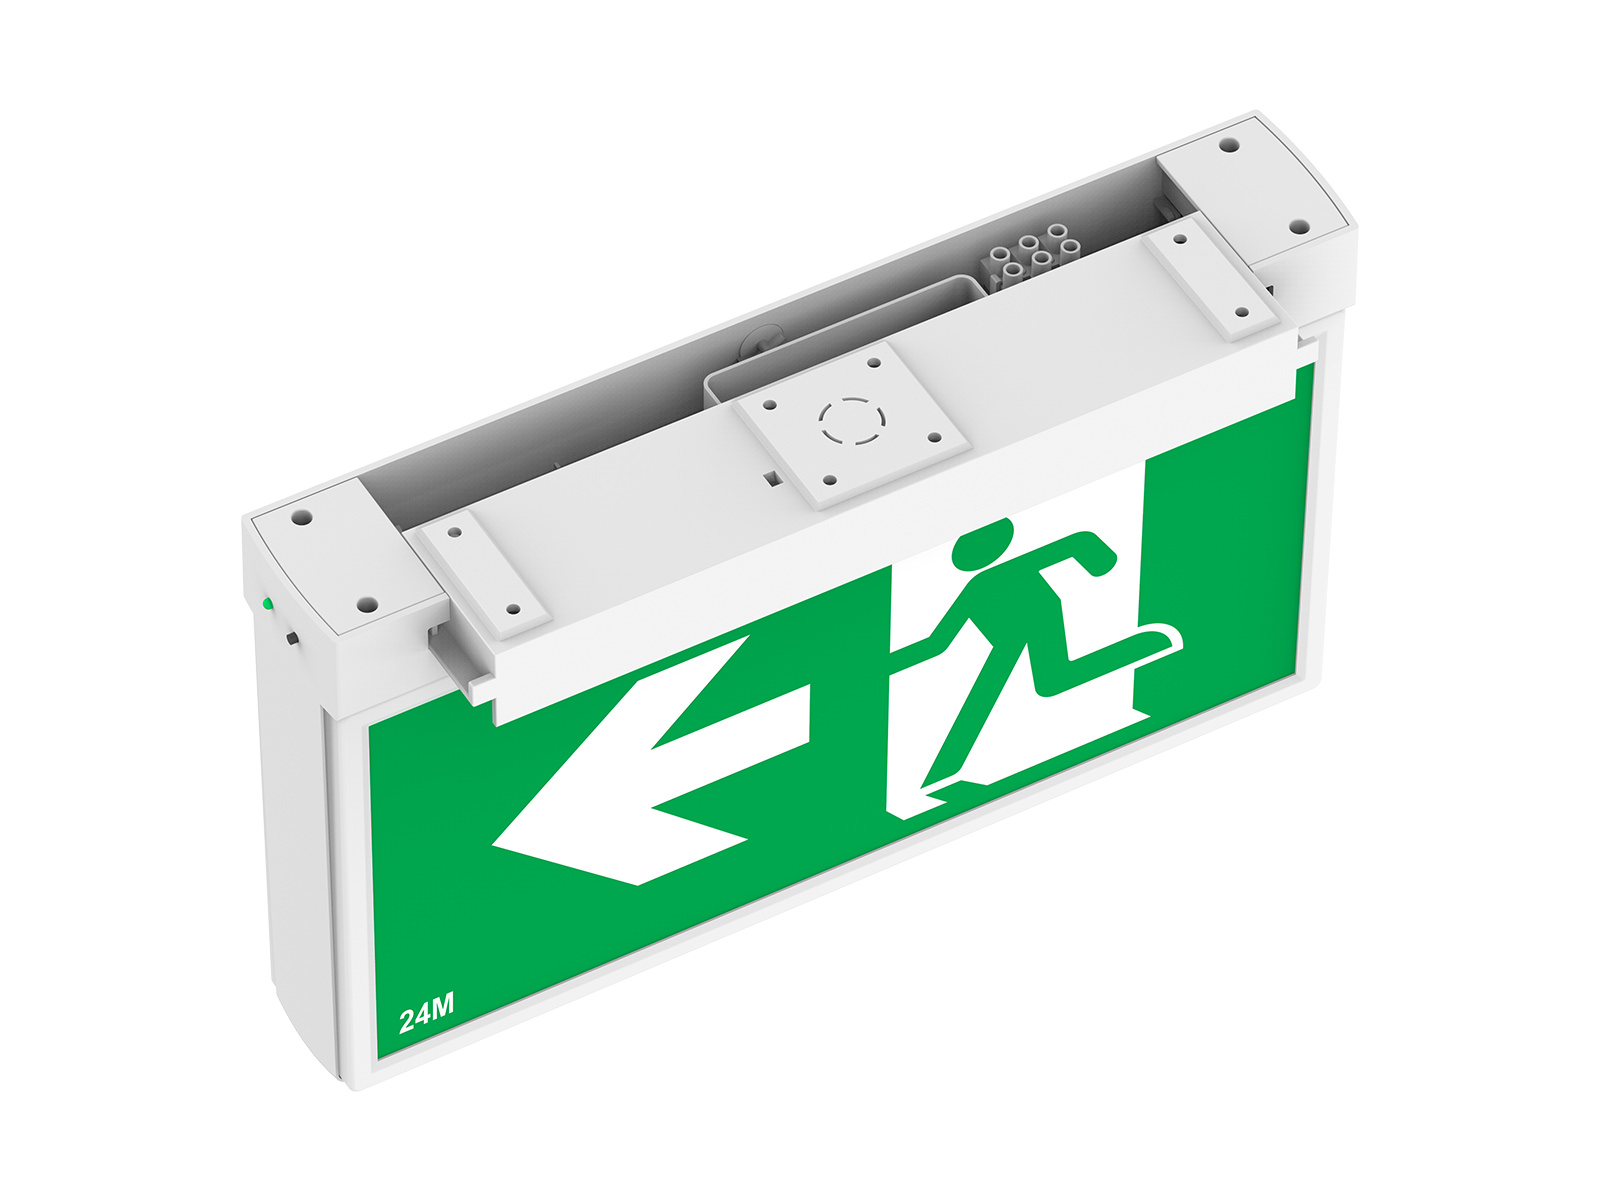 EPA EX1 LED Exit Sign with LiFePO4 battery